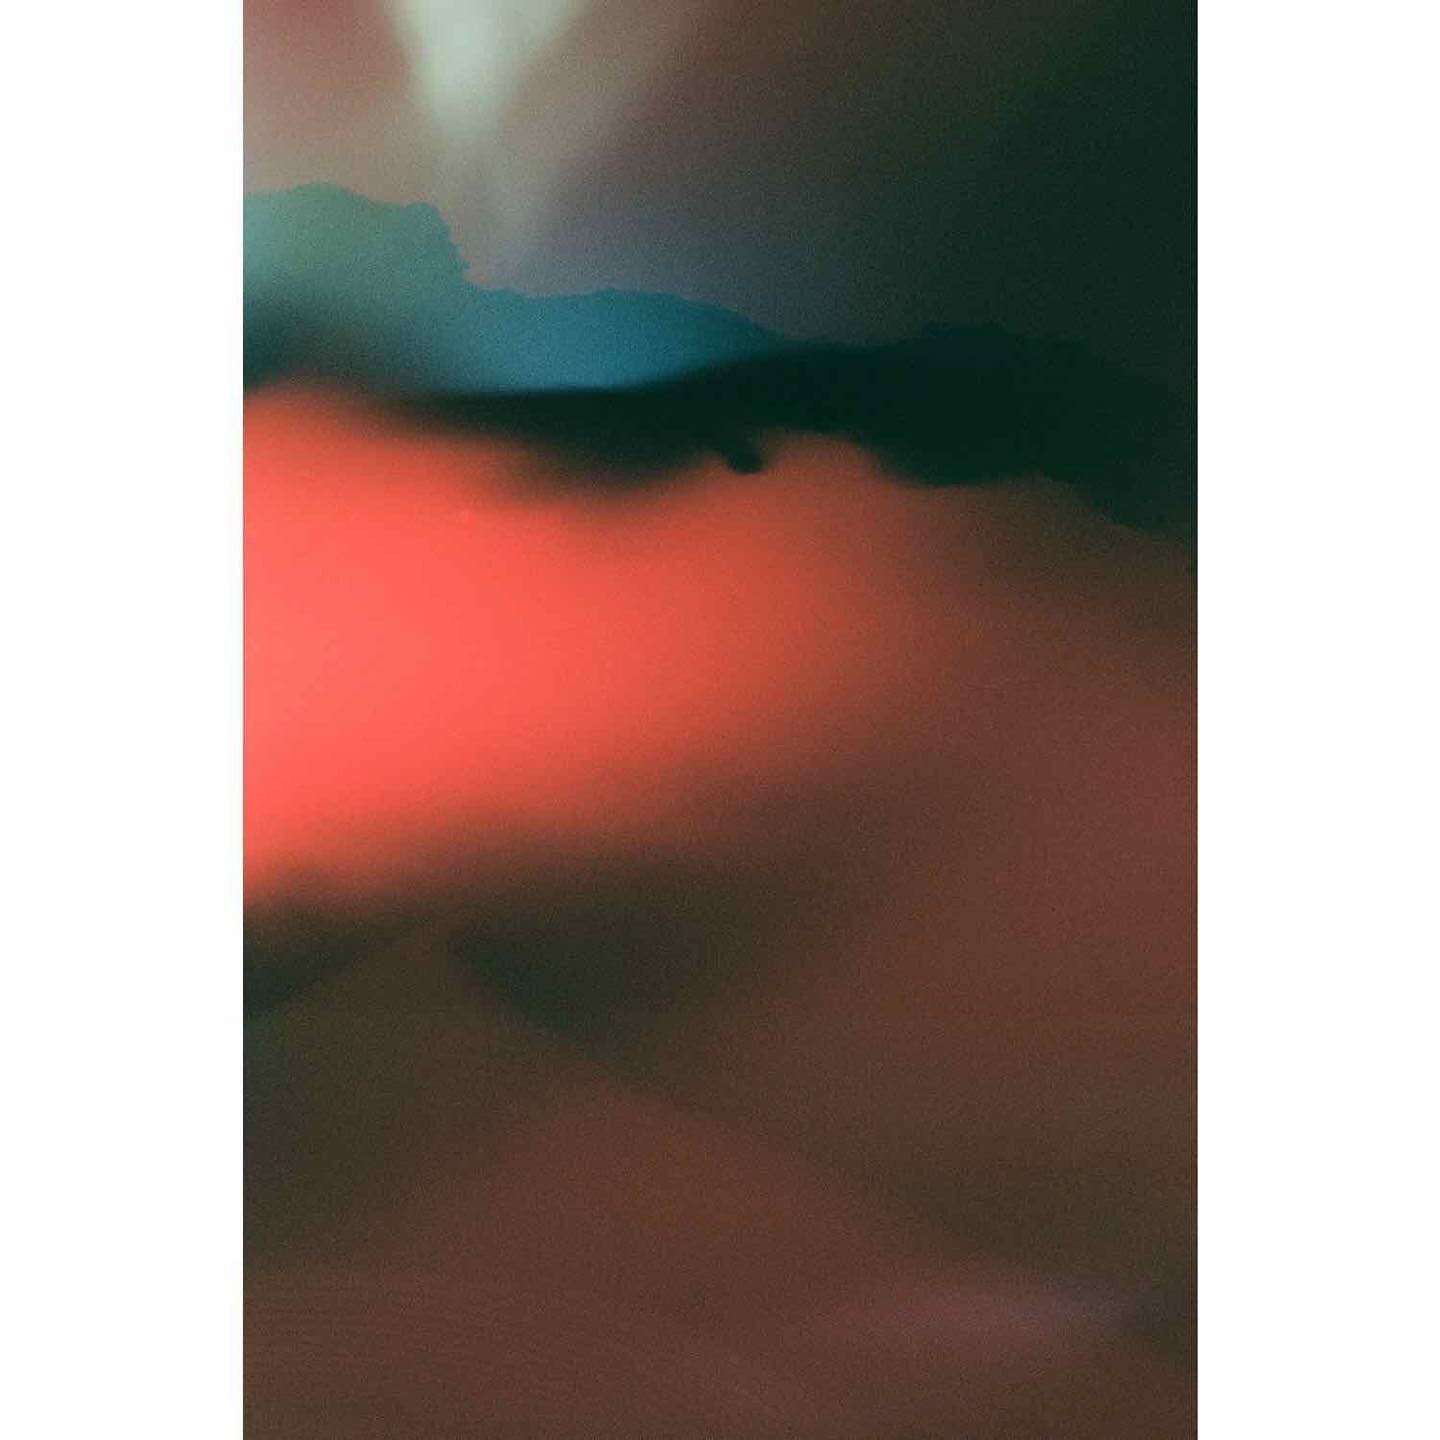 &ldquo;Imagined Landscape #25,&rdquo; 2020. I&rsquo;m excited to share some new work made with an old homemade camera. 
.
.
.
.
.
.
#imaginarymagnitude #theadventurehandbook #ifyouleave #portbox #ignant #analogforever #mytinyatlas #oftheafternoon #su